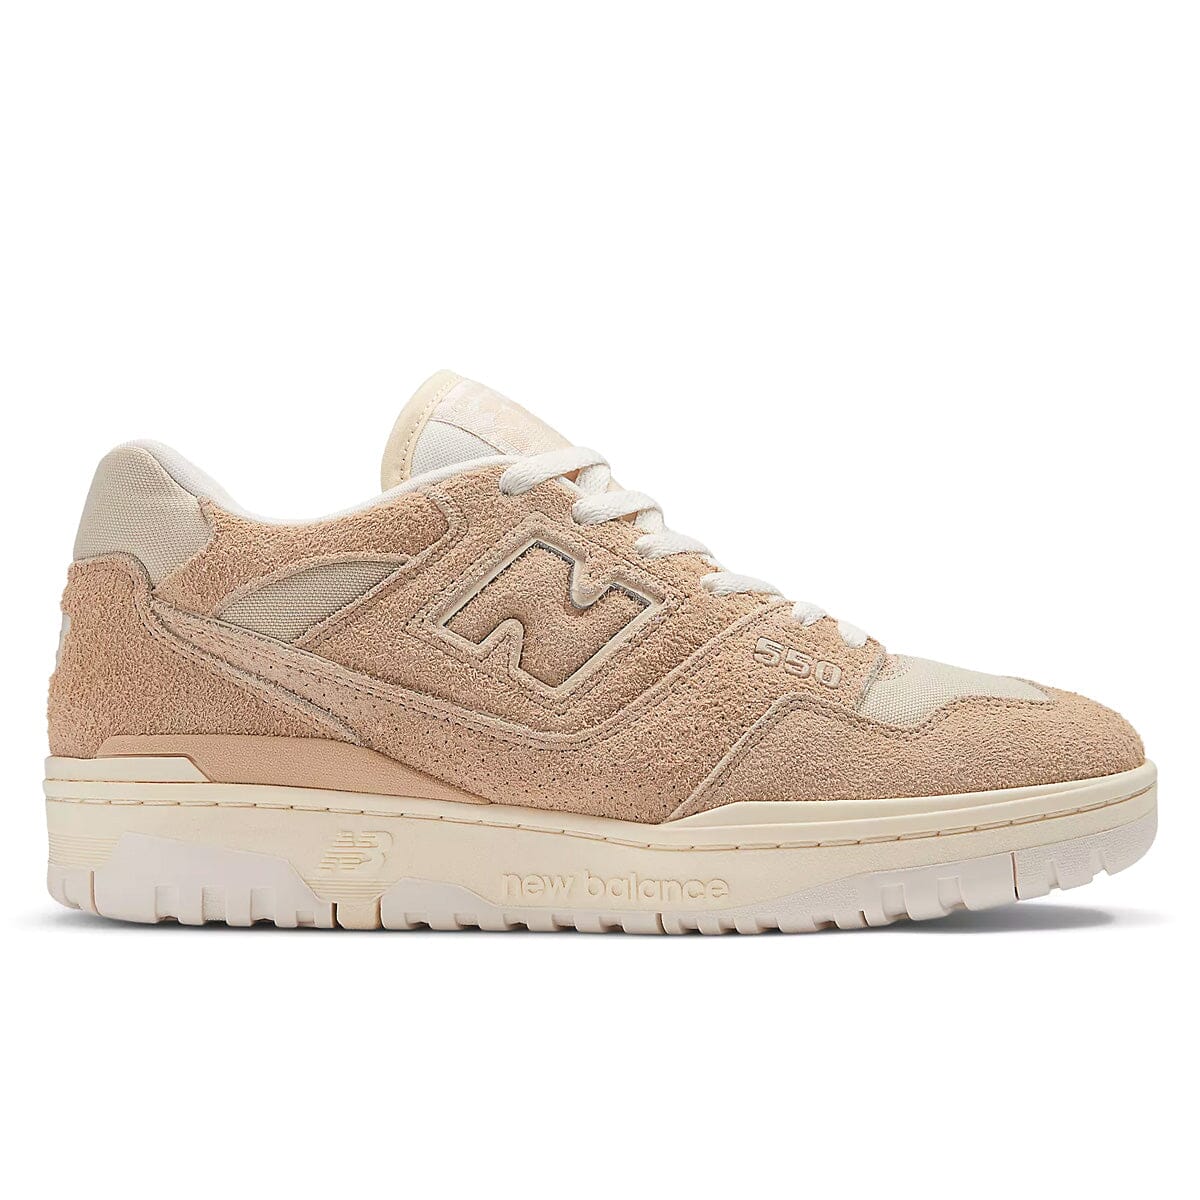 New Balance 550 Aime Leon Dore Taupe Suede New Balance 550 Blizz Sneakers 